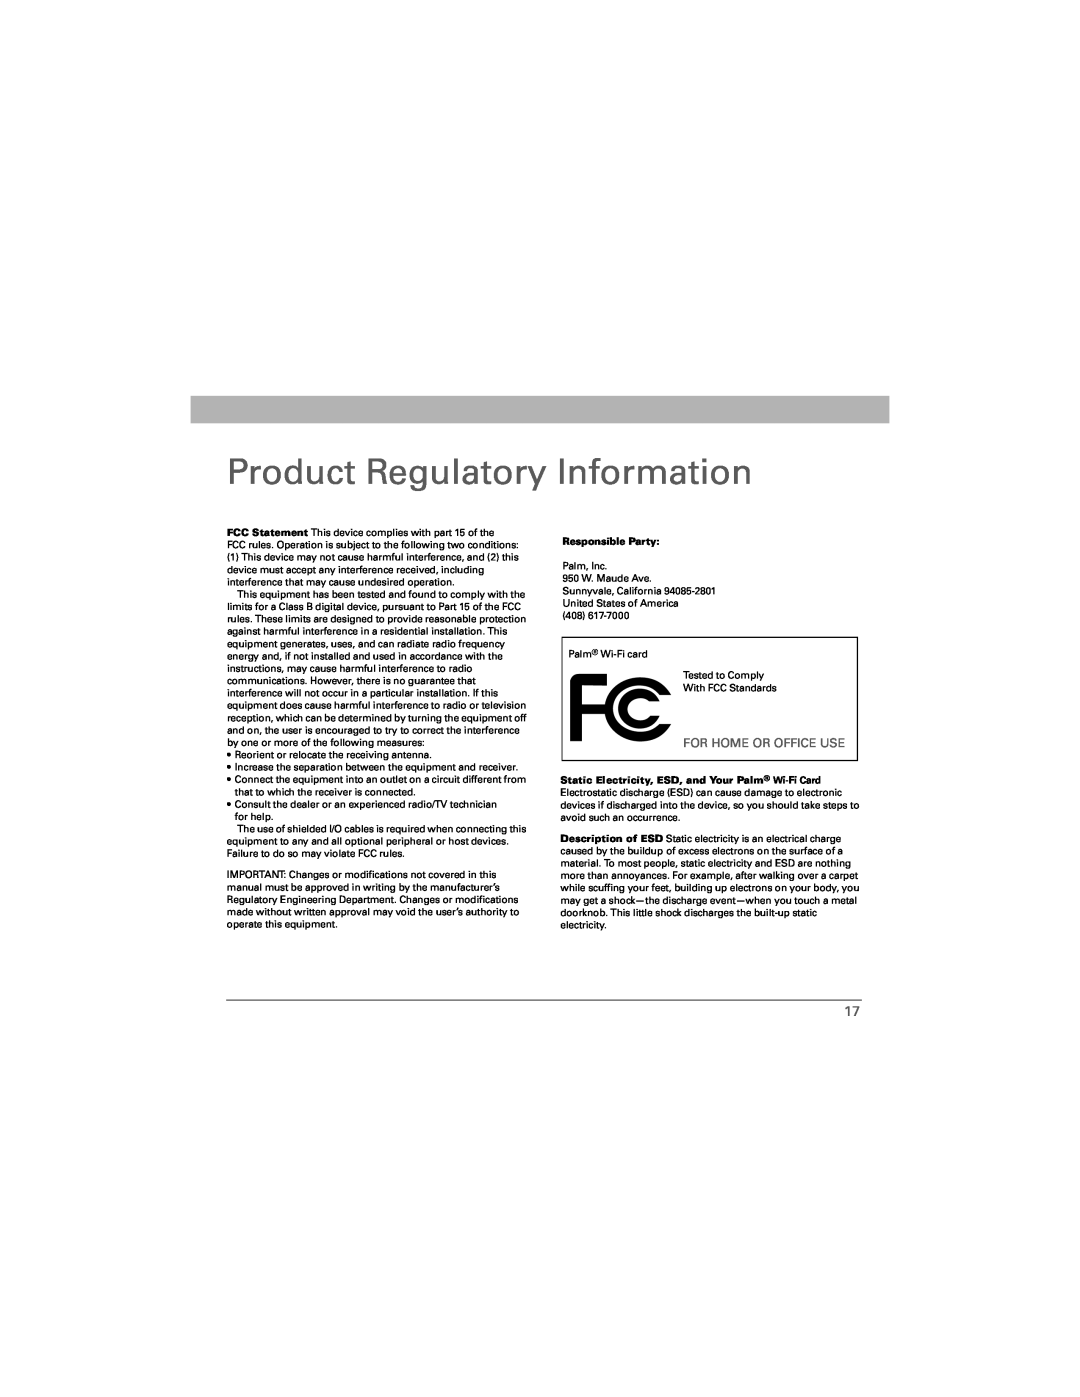 Palm Wi-Fi Card manual Product Regulatory Information, For Home Or Office Use, Responsible Party 